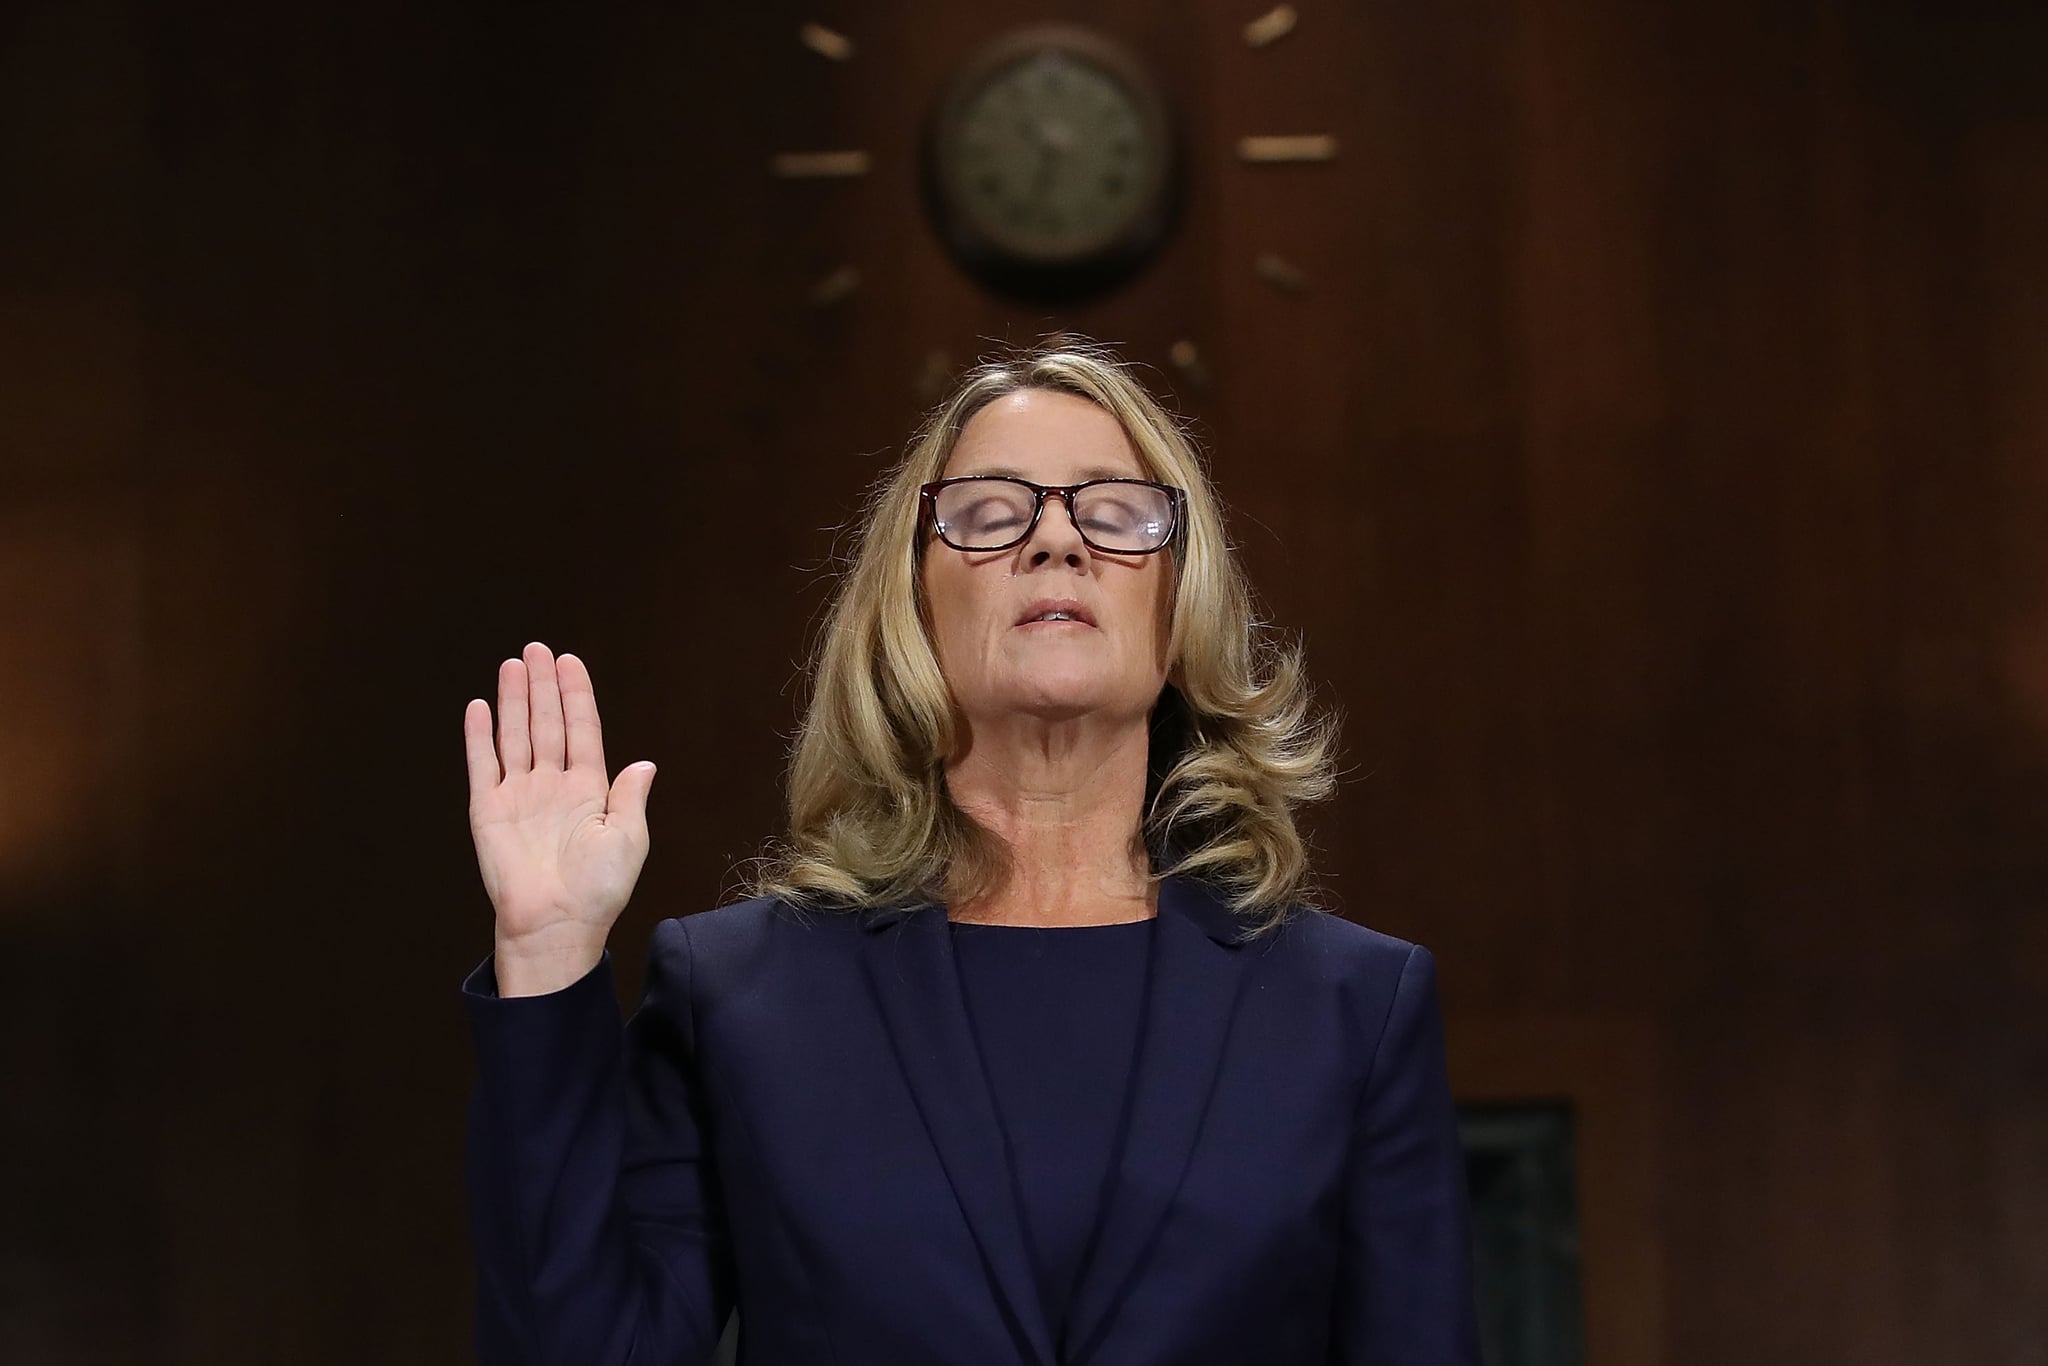 WASHINGTON, DC - SEPTEMBER 27:  Christine Blasey Ford is sworn in before testifying the Senate Judiciary Committee in the Dirksen Senate Office Building on Capitol Hill September 27, 2018 in Washington, DC. A professor at Palo Alto University and a research psychologist at the Stanford University School of Medicine, Ford has accused Supreme Court nominee Judge Brett Kavanaugh of sexually assaulting her during a party in 1982 when they were high school students in suburban Maryland. In prepared remarks, Ford said, ÒI donÕt have all the answers, and I donÕt remember as much as I would like to. But the details about that night that bring me here today are ones I will never forget. They have been seared into my memory and have haunted me episodically as an adult.Ó  (Photo by Win McNamee/Getty Images)